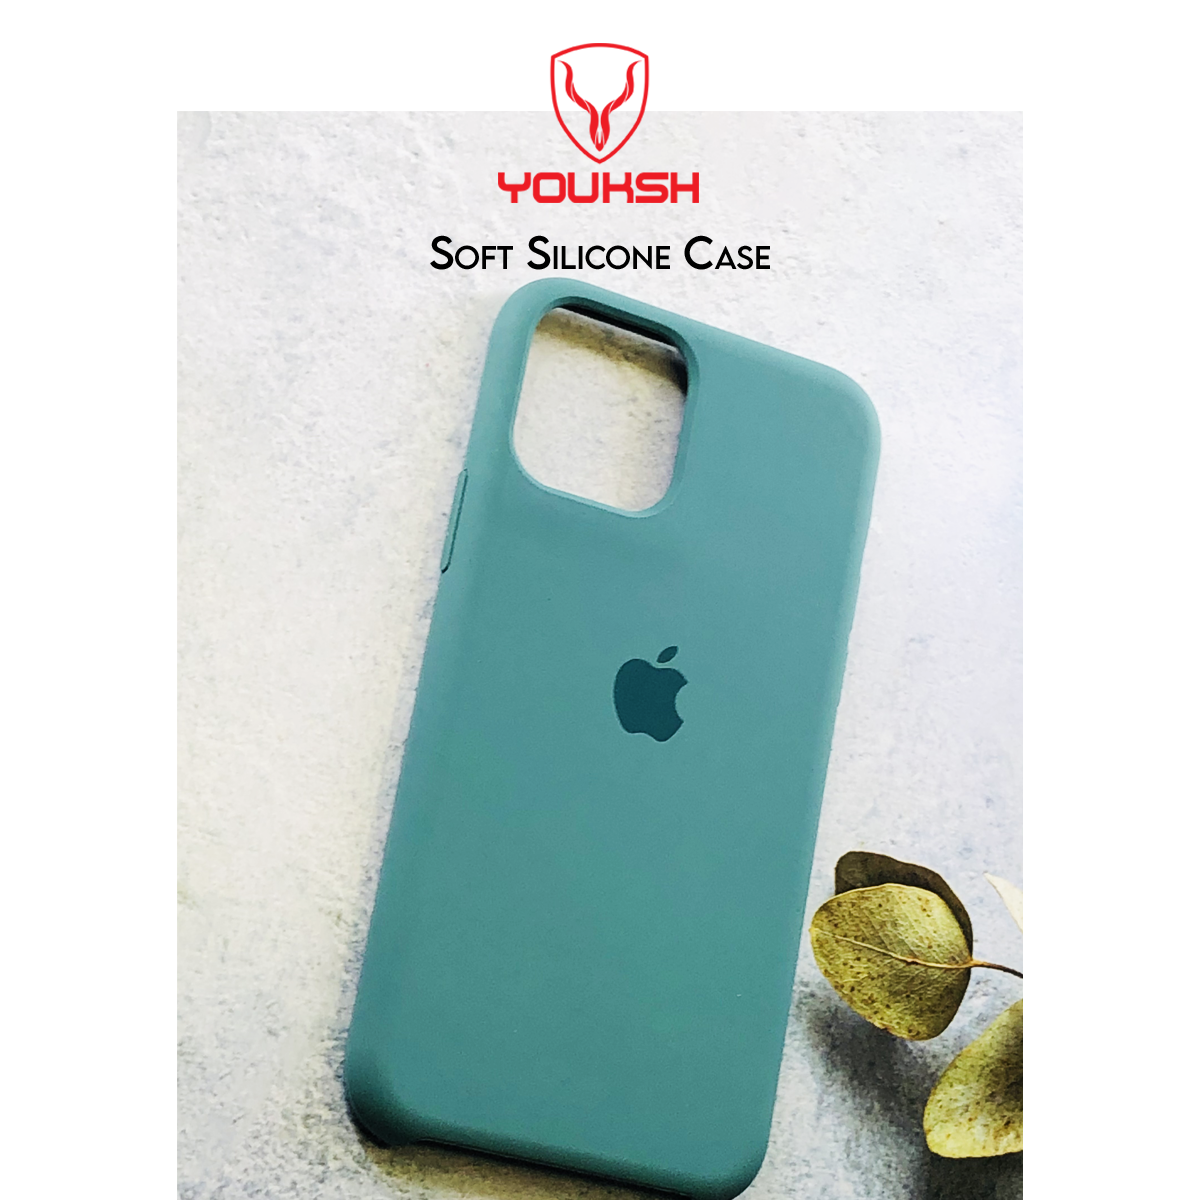 Apple iPhone 11 Pro - Youksh Premium Ultra Slim Shockproof Liquid Silky Silicone Soft Rubber Comfortable Protective Case.